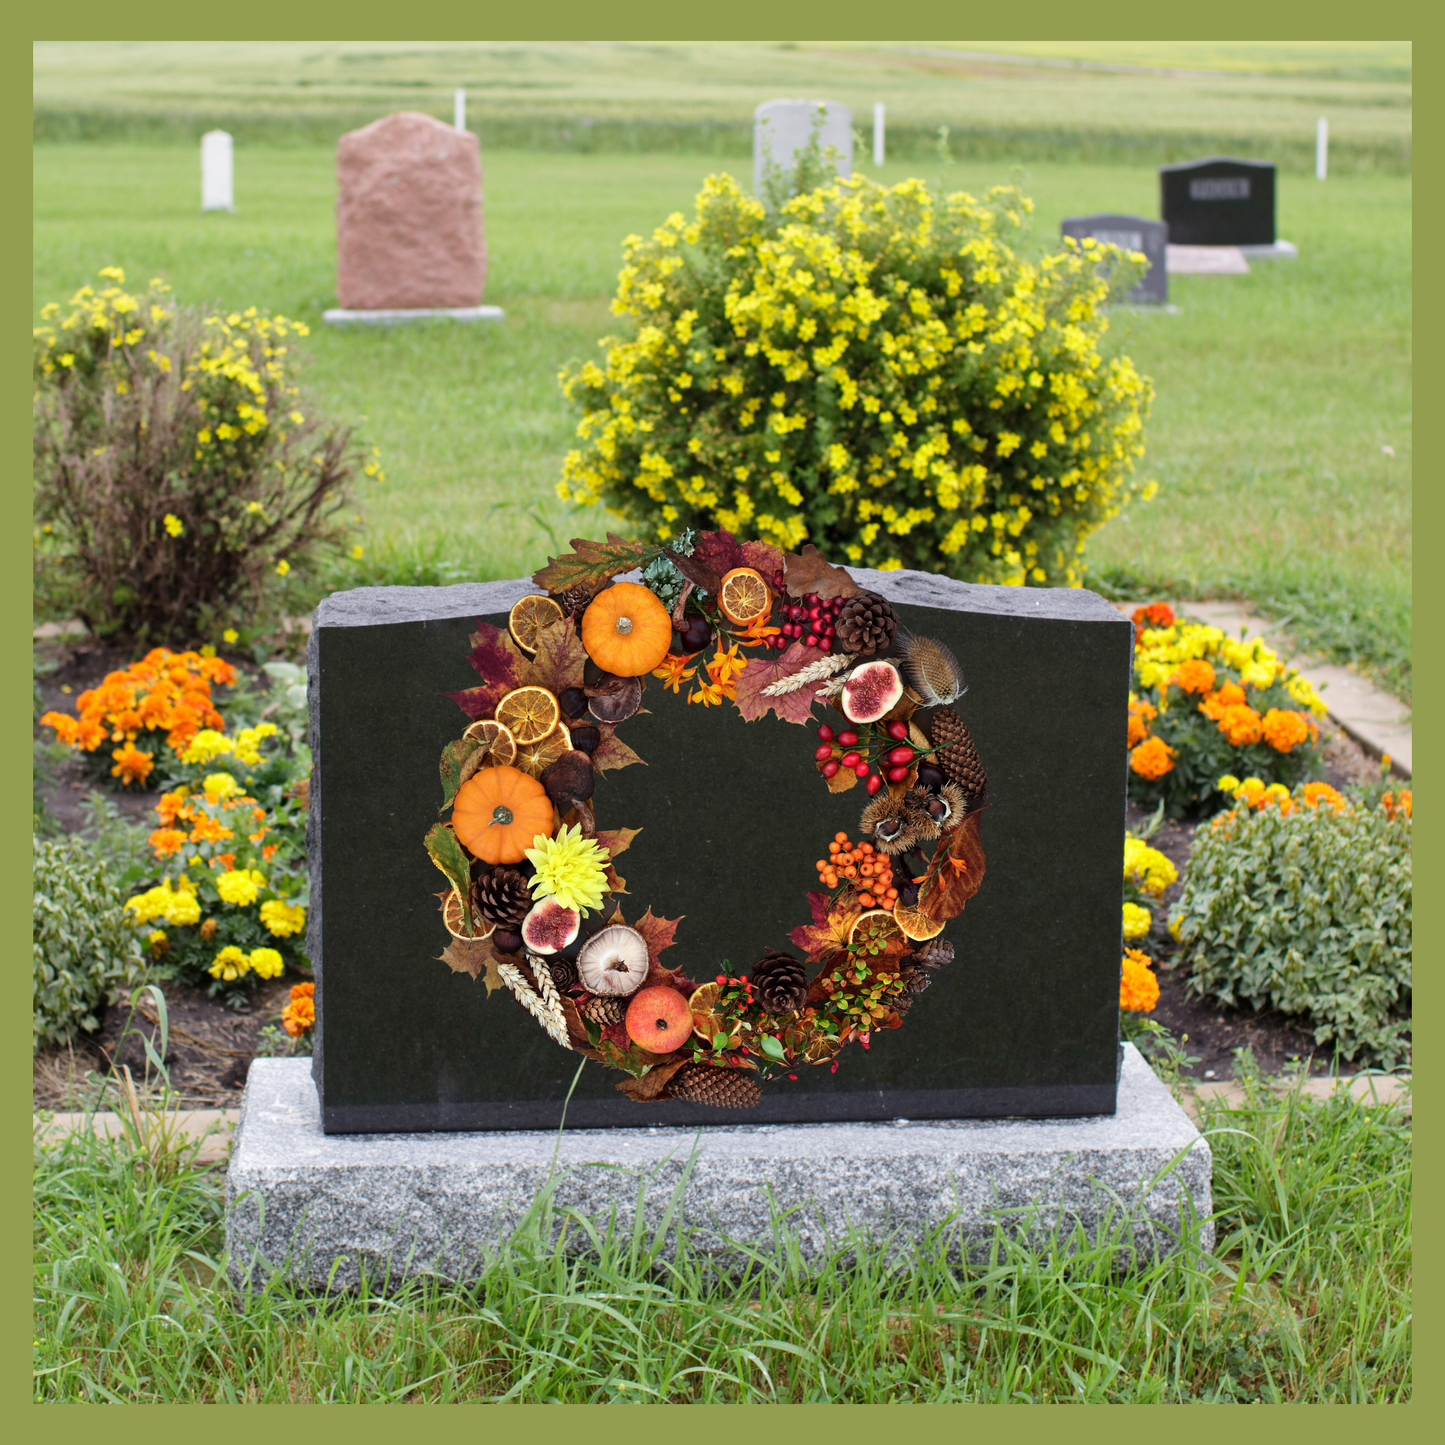 Christmas Wreath for Cemetary Delivered for You